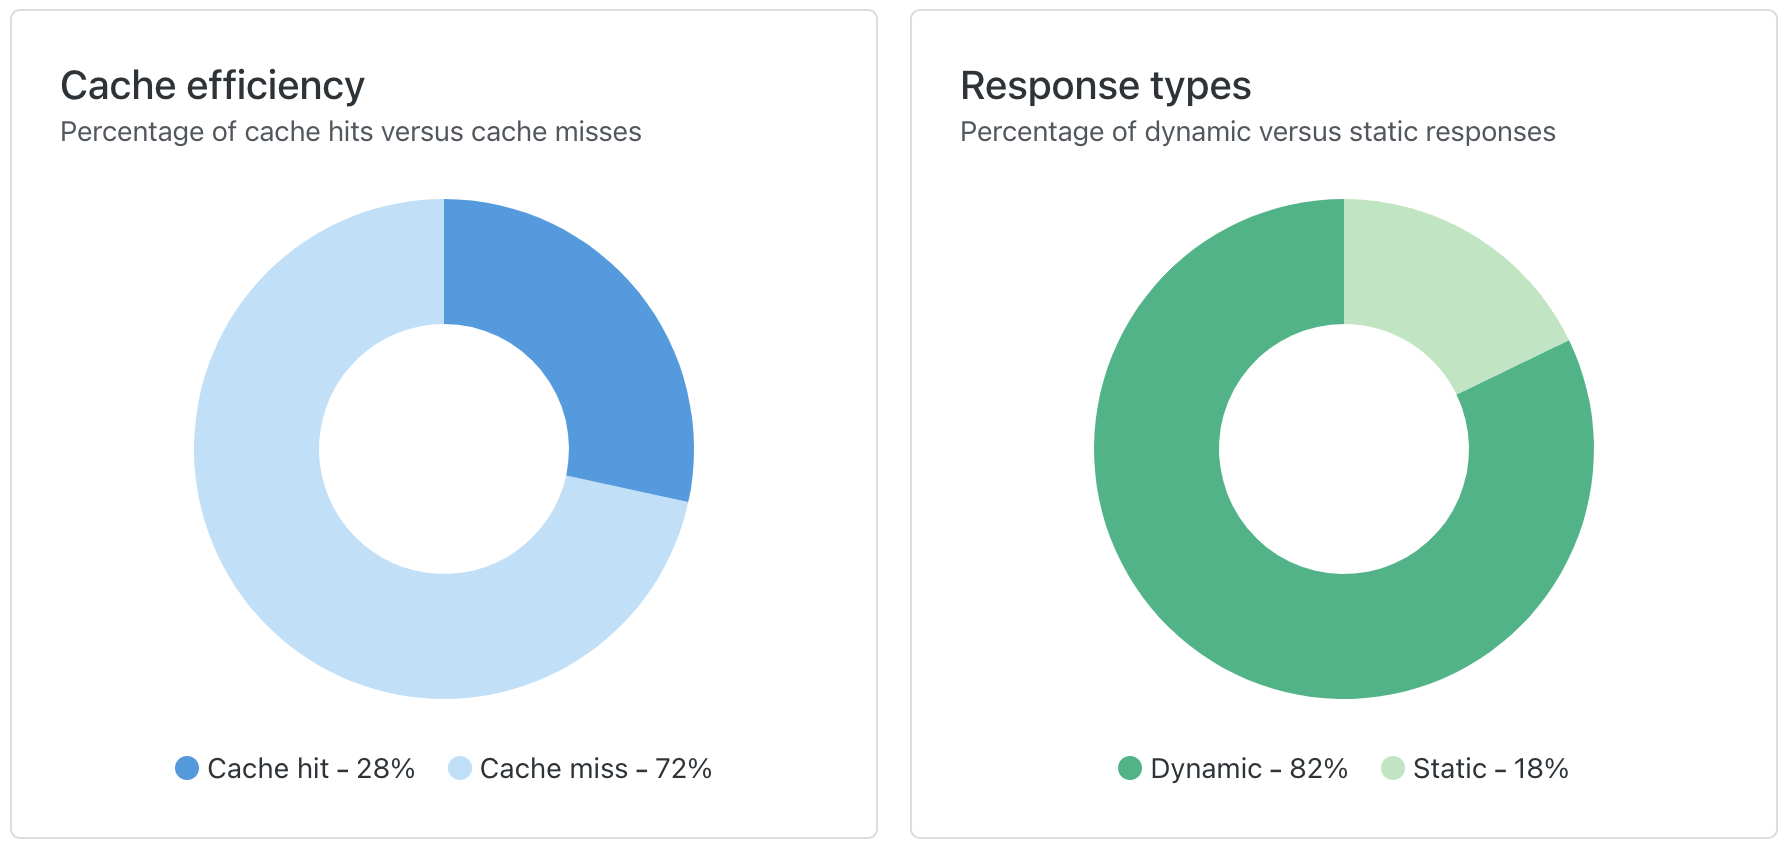 Image showing two pie charts. The first one shows a breakdown of cache efficiency for hits versus cache miss. The second shows the breakdown of dynamic versus static response types.